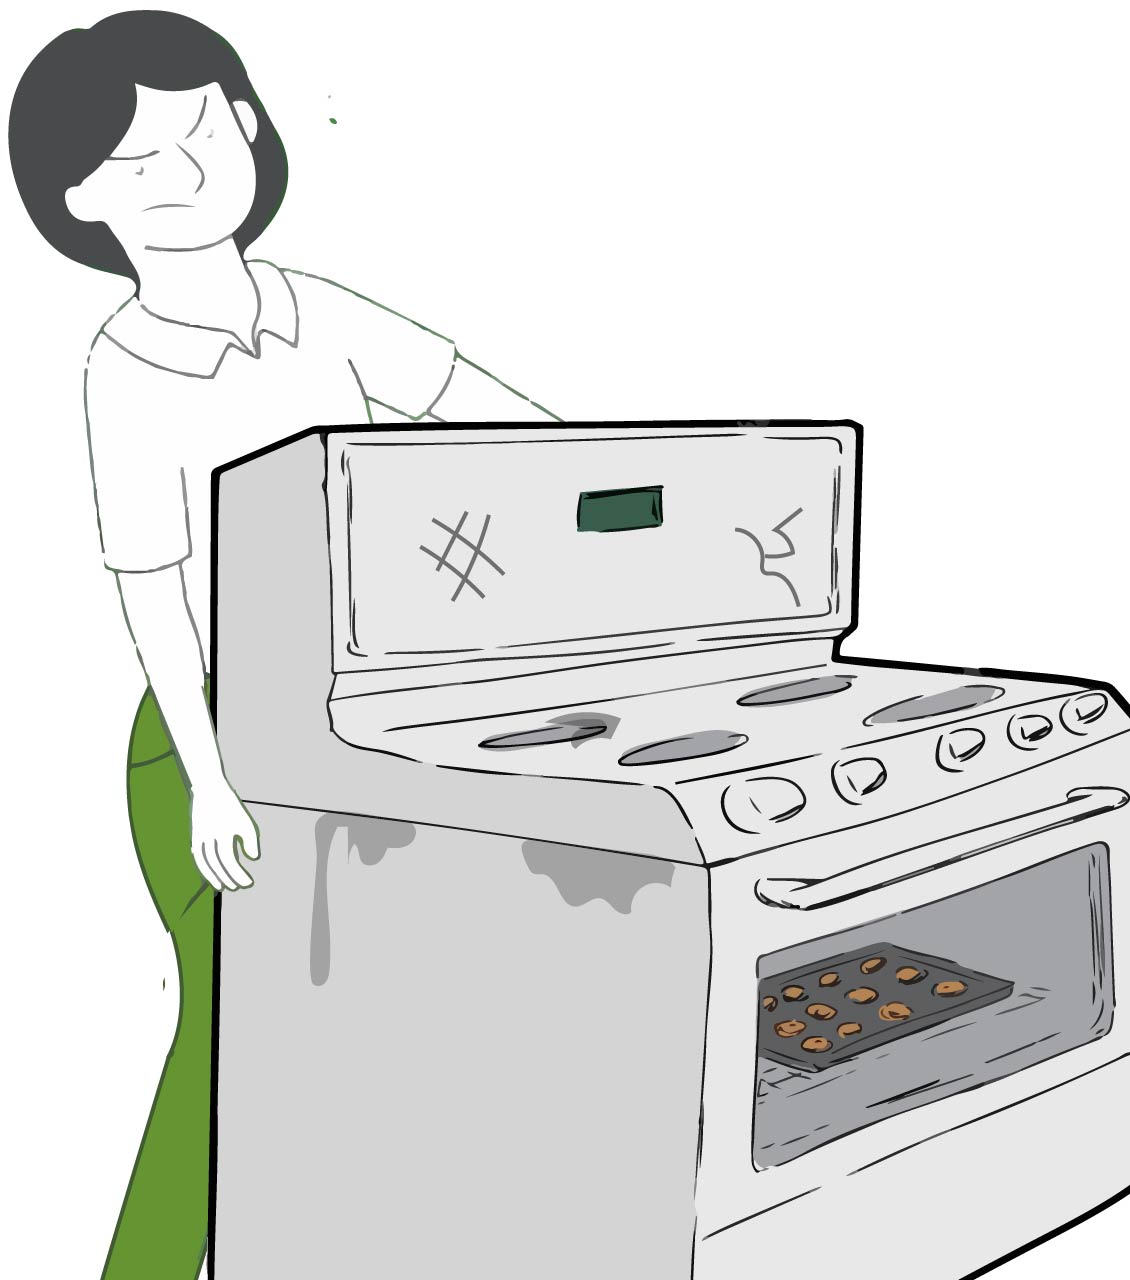 Washington DC oven removal services